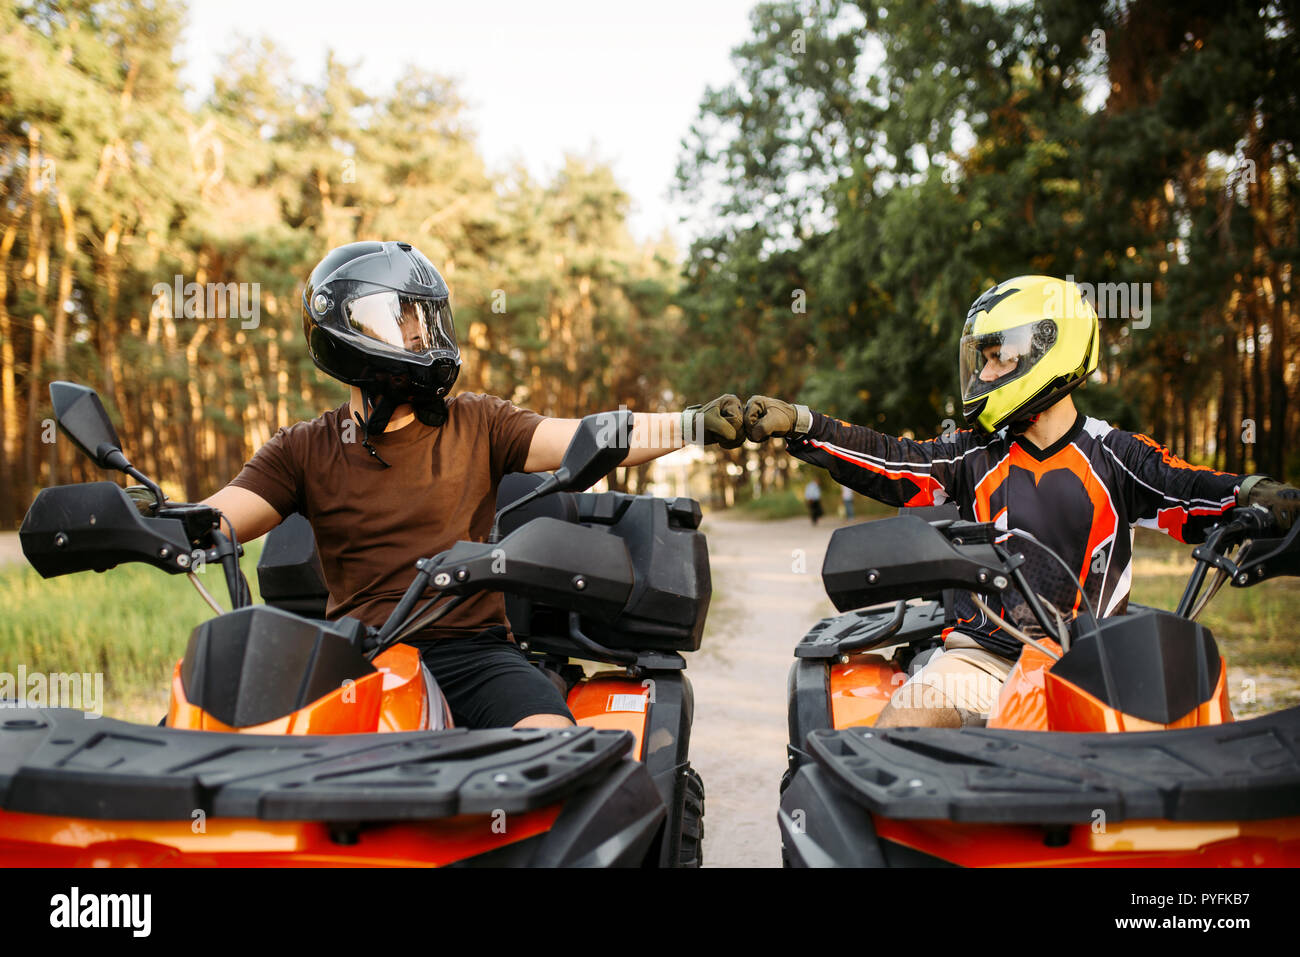 Two Atv Riders In Helmets Hits Fists For Good Luck Before Dangerous Extreme Offroad Riding Front View Summer Forest On Background Freeriding On Qua Stock Photo Alamy